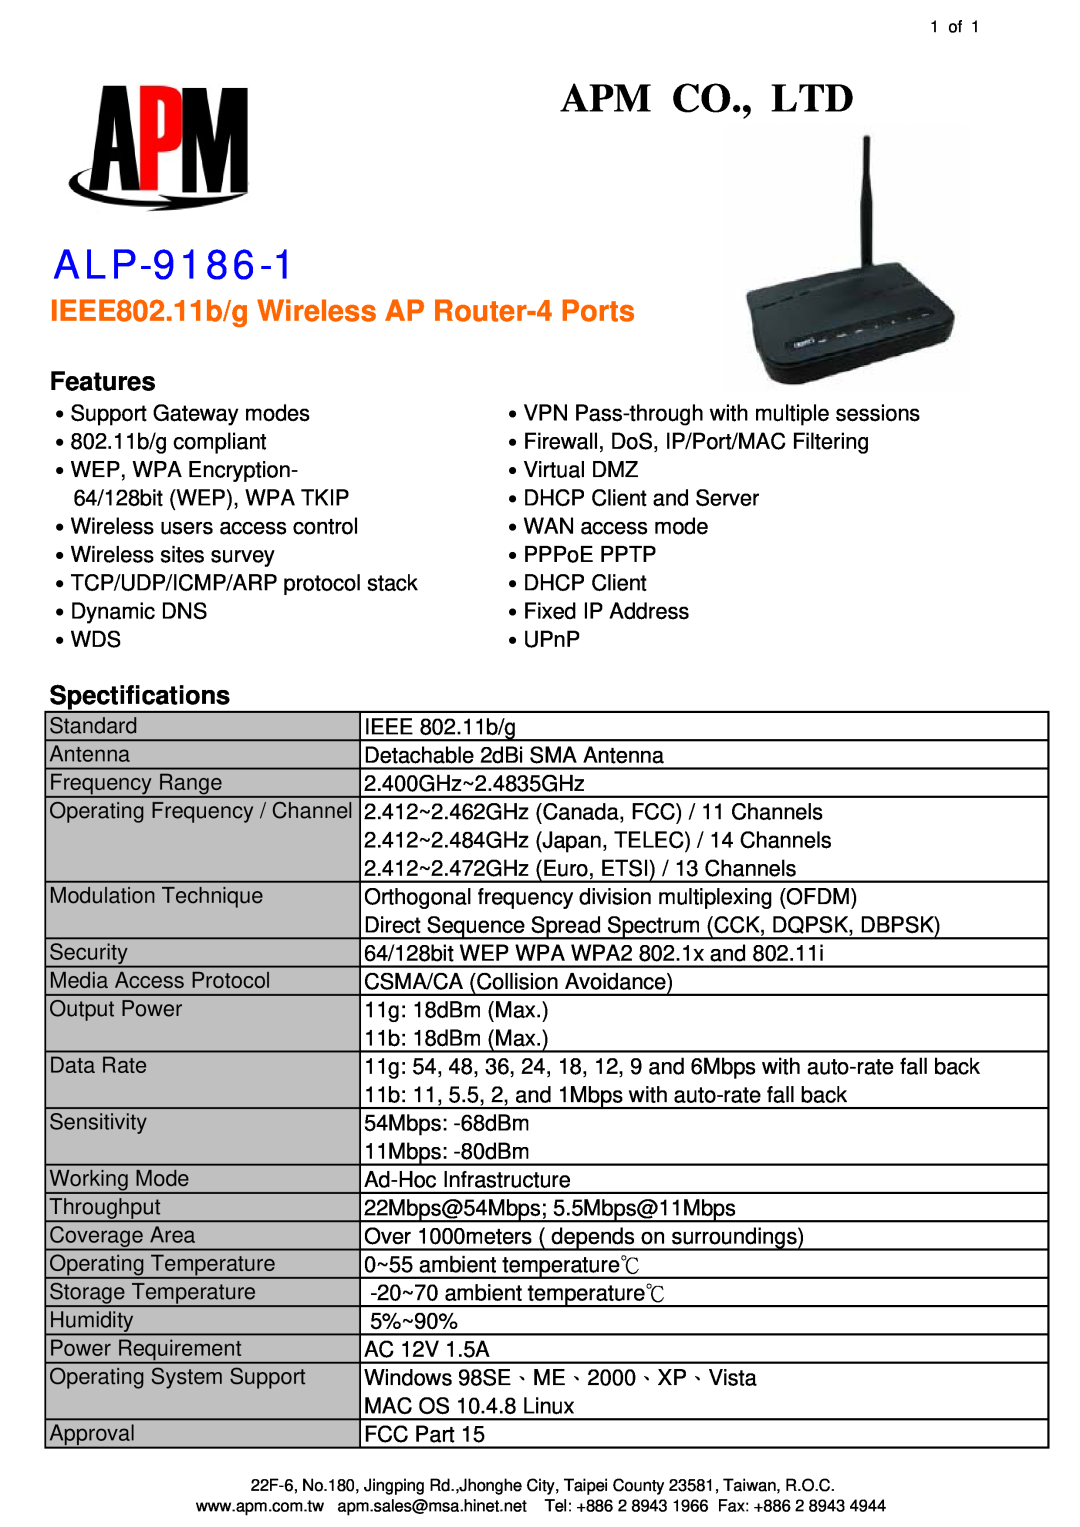 APM ALP-9186-1 manual IEEE802.11b/g Wireless AP Router-4 Ports, Features, Spectifications 